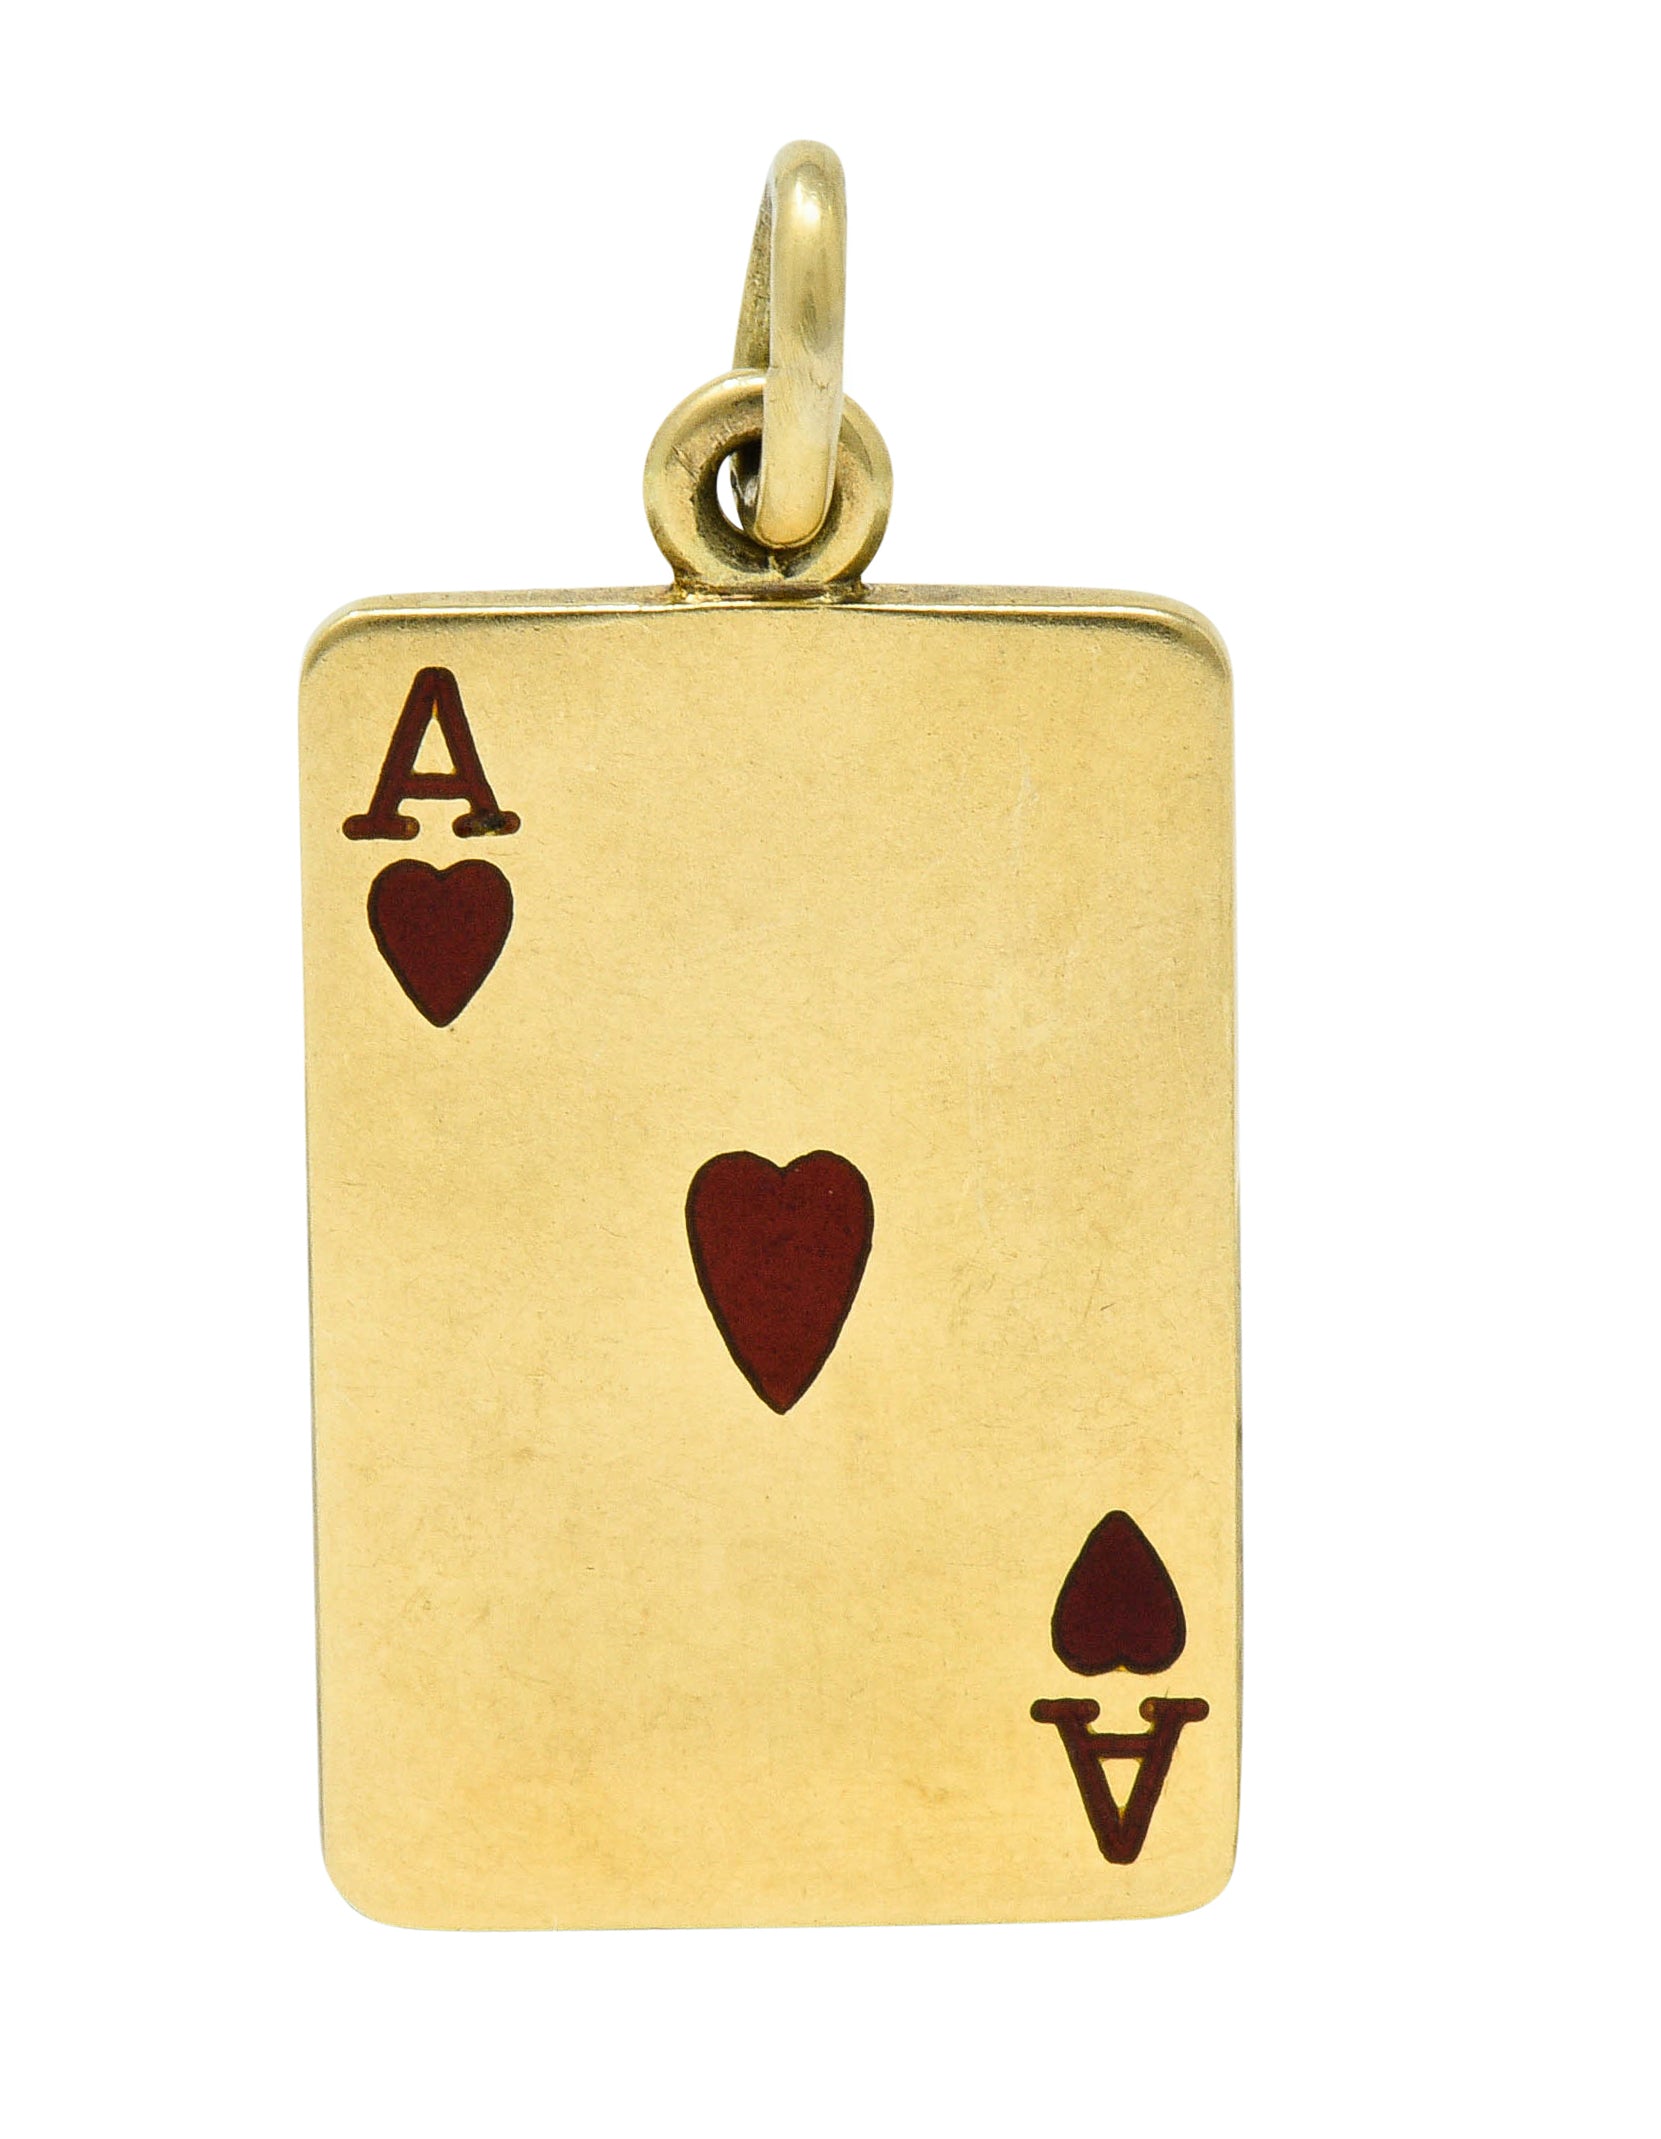 Gold Ace of Spades Pendant 14k Solid Gold Ace of Spades 